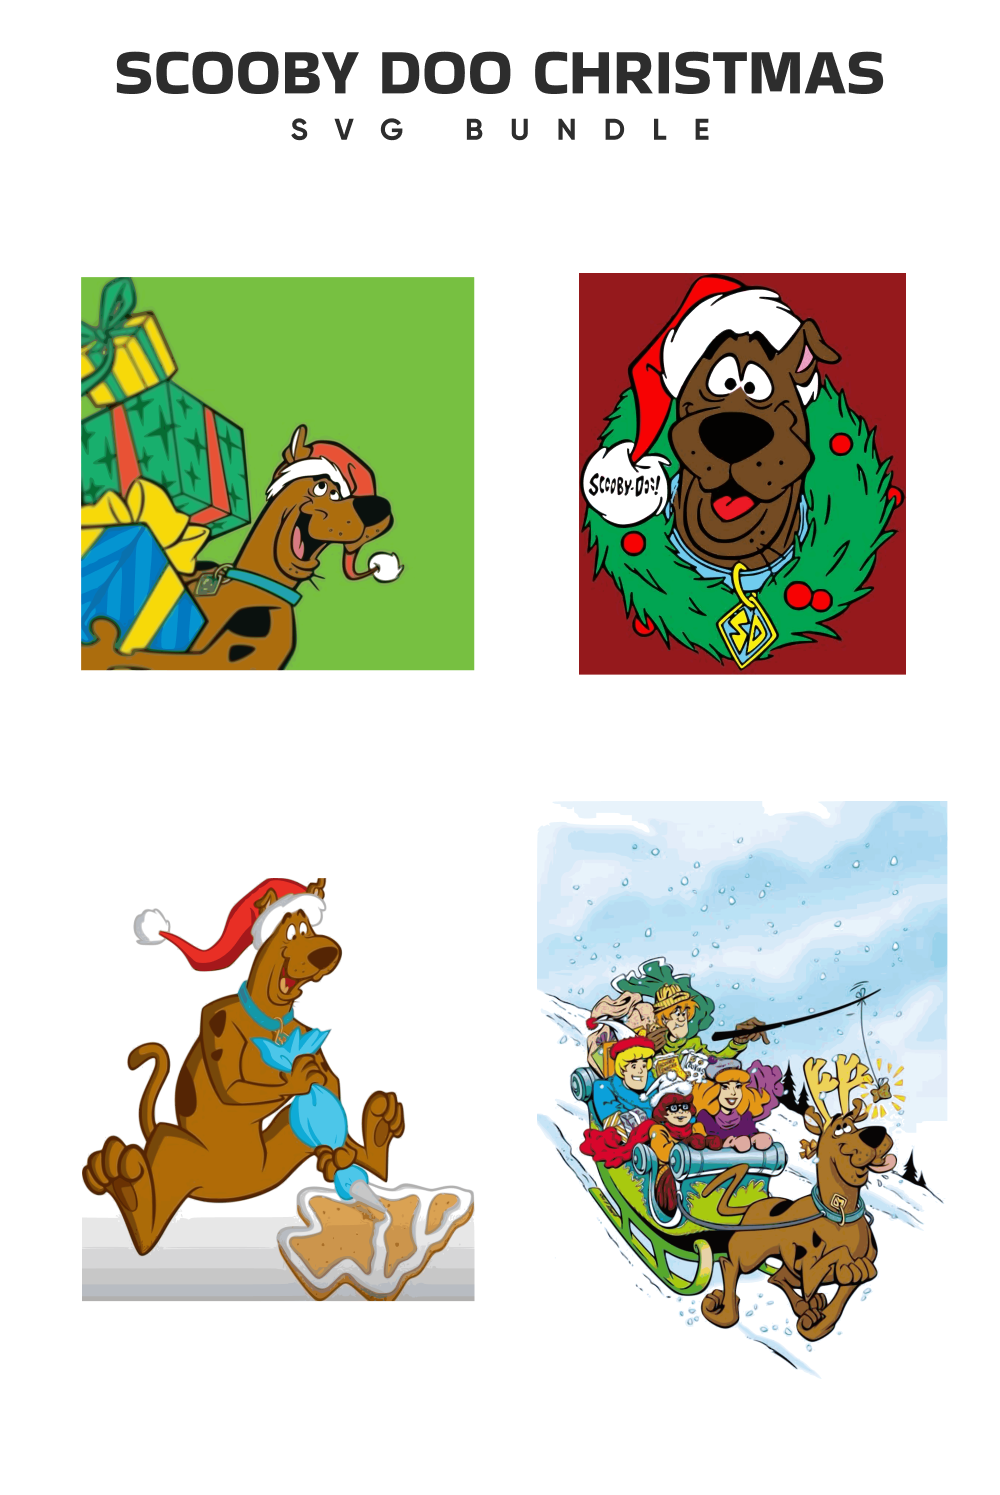 Some looks of scooby doo for christmas.